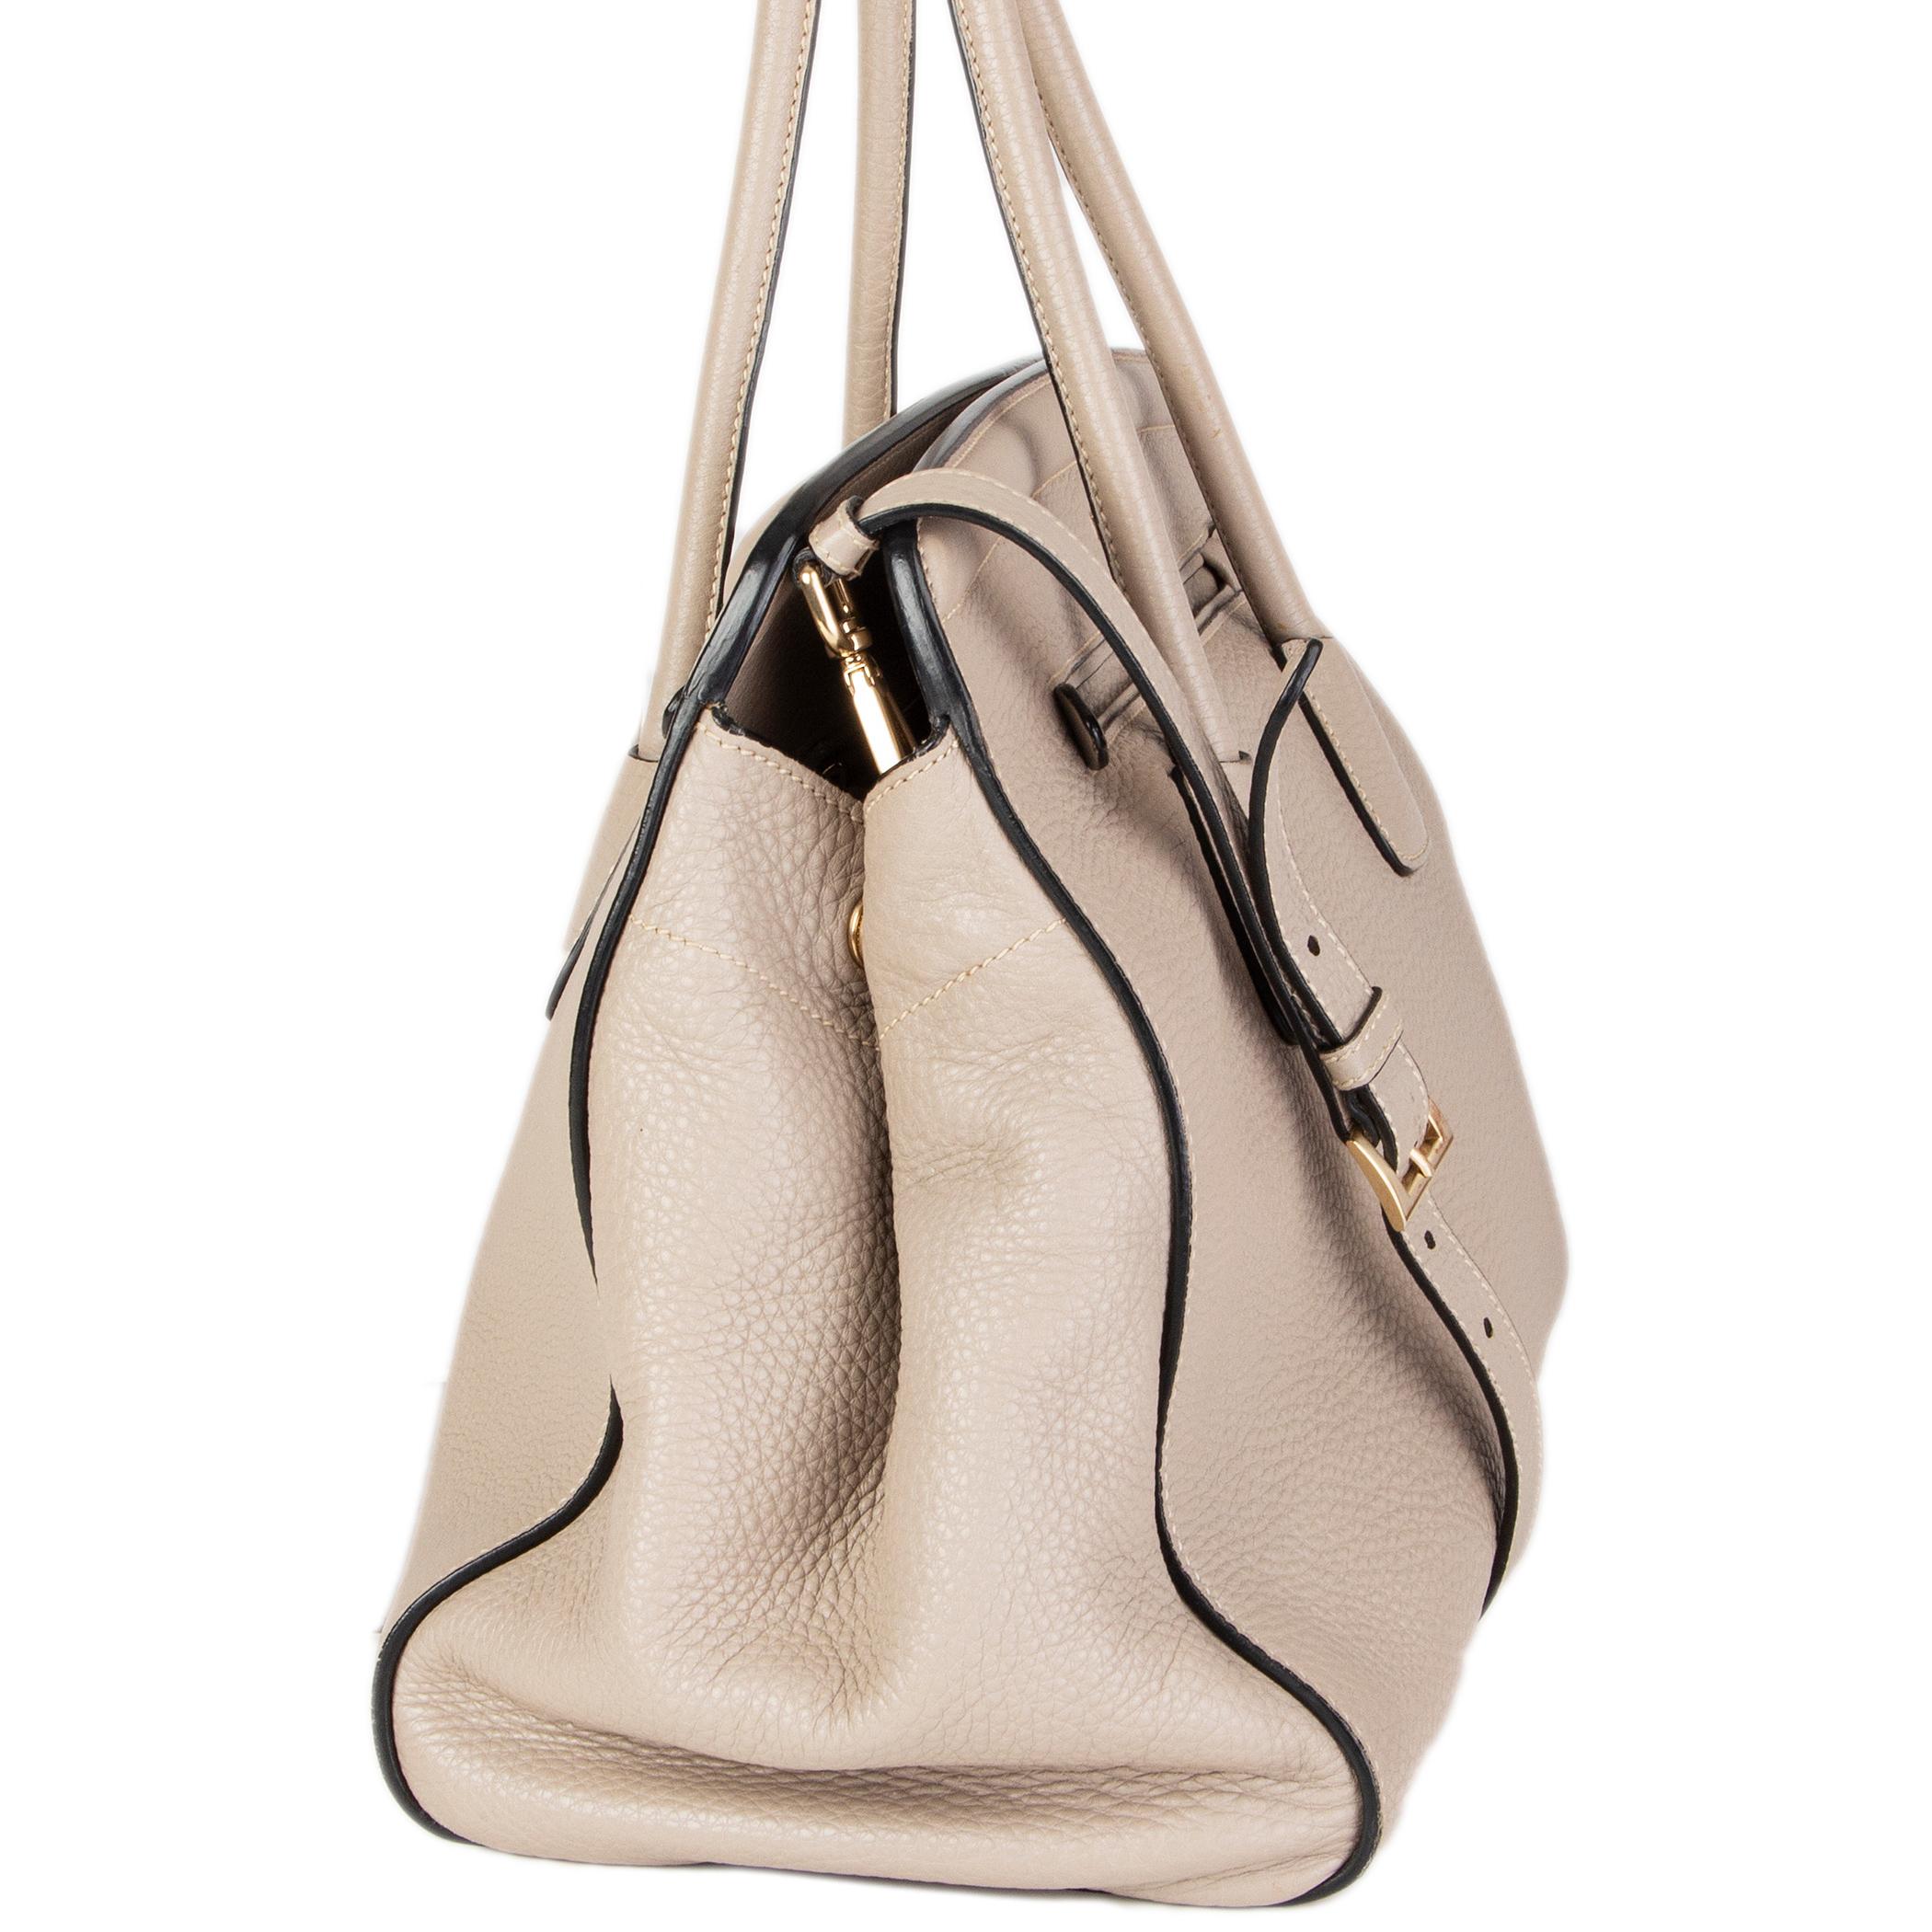 Prada 'BN2571' shoulder bag in Pomice (light taupe) Vitello Daino leather with an open pocket on the front and back. Removable and adjustable shoulder strap. Closes with a snap-button on top. Lined in beige canvas with two open pockets against the